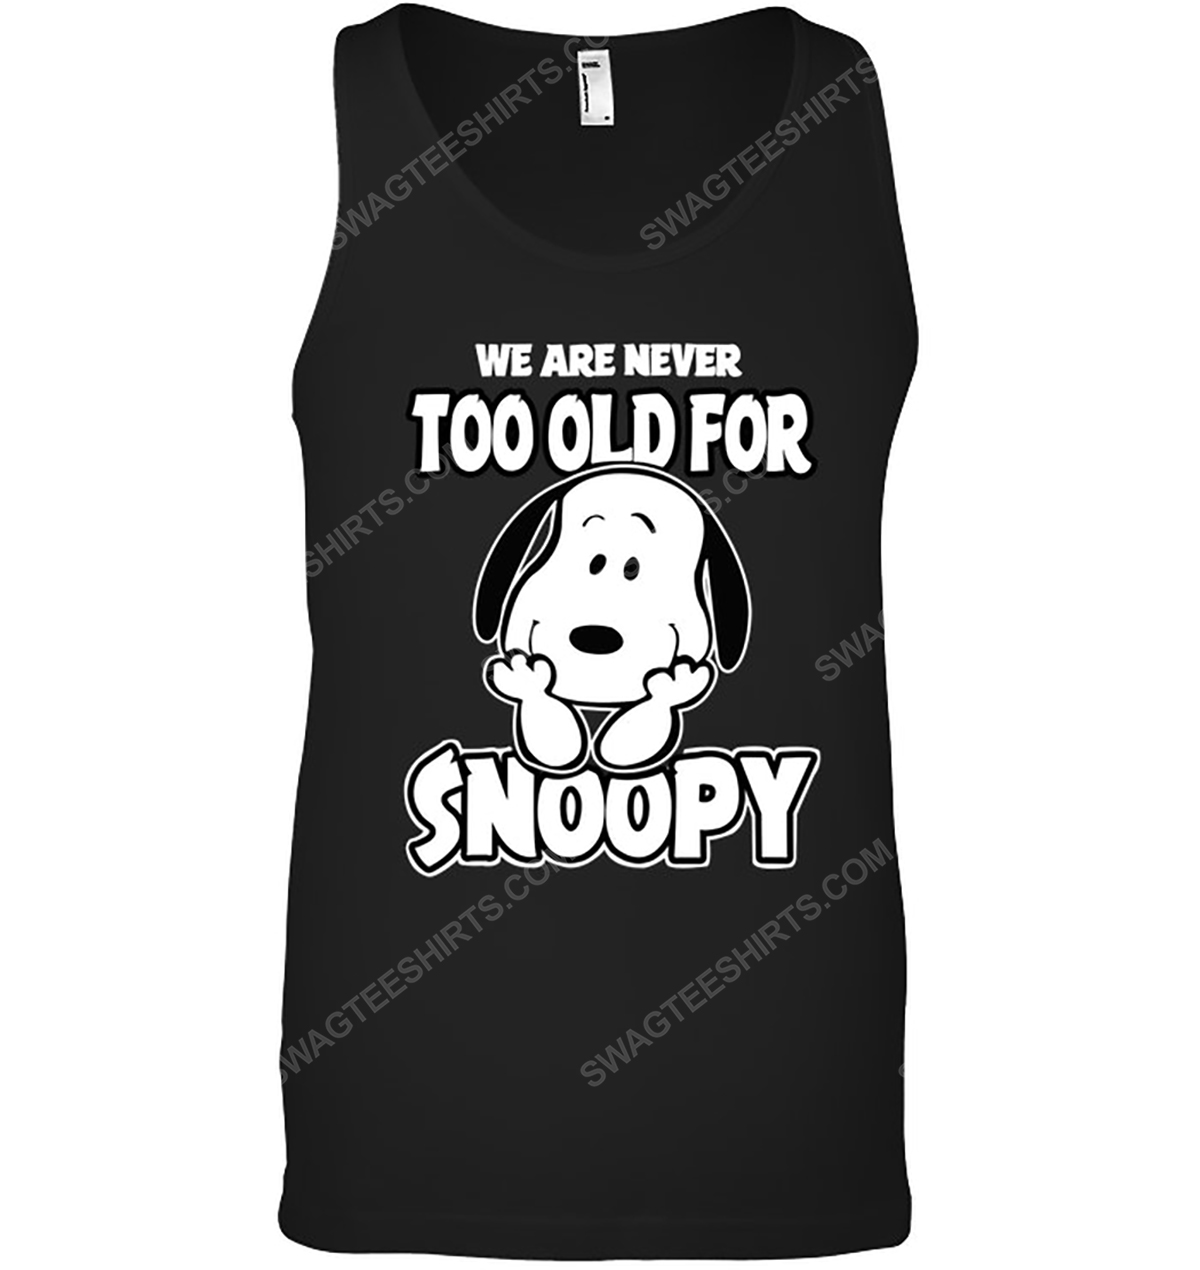 We are never too old for snoopy charlie brown tank top 1